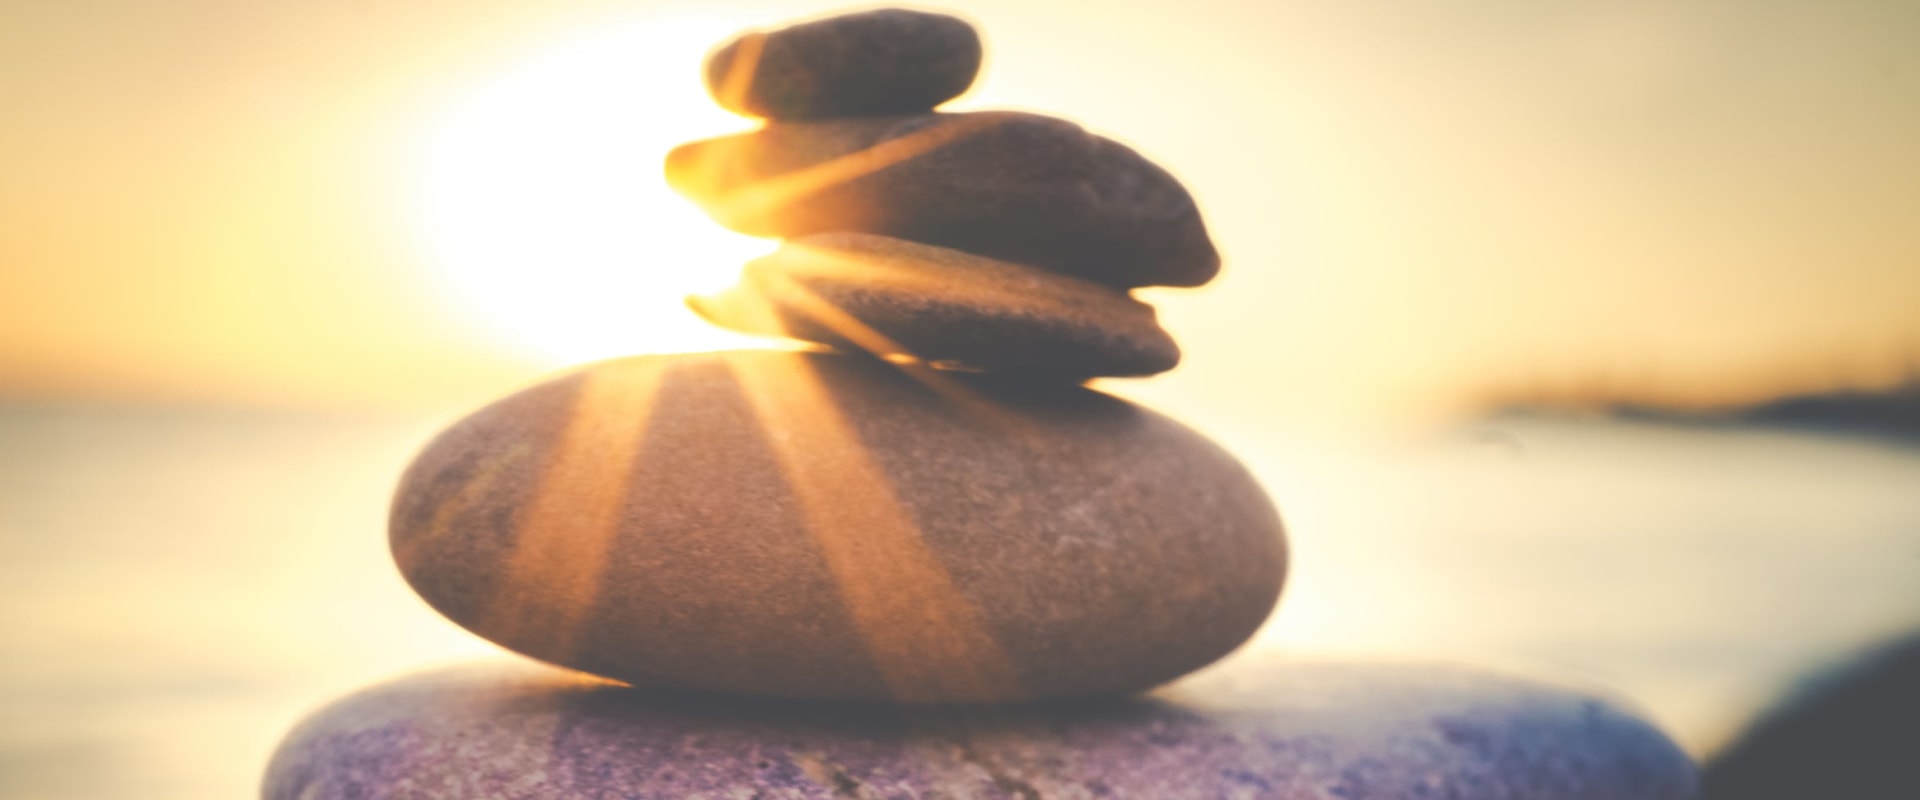 Spiritual Health vs. Emotional Health: What's the Difference and How to Balance Them